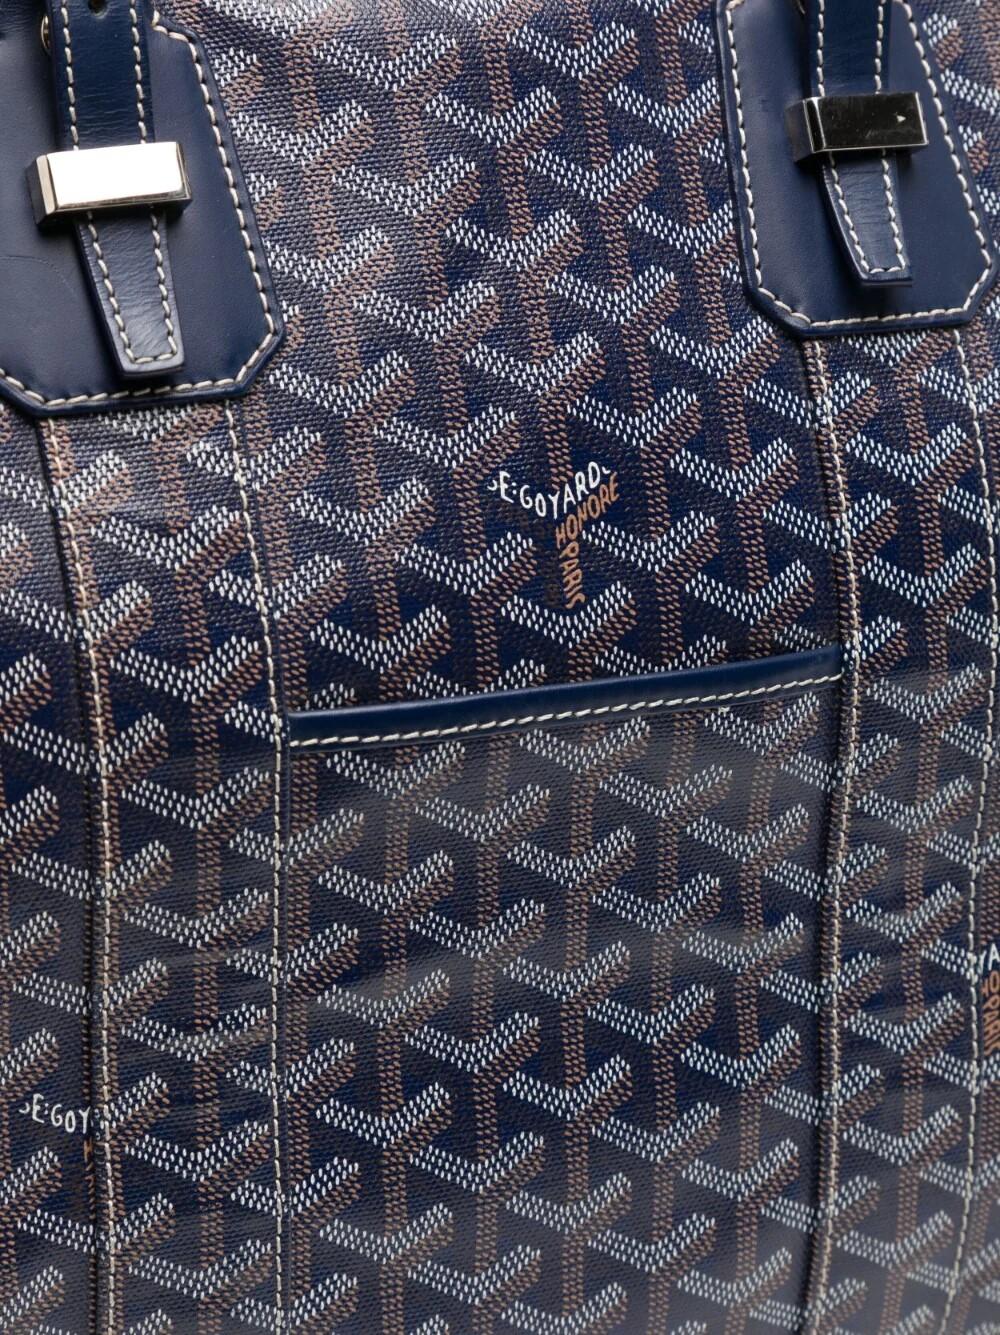 The perfect weekender bag, this holdall travel bag has the iconic Goyard navy monogram all over. It features two adjustable top handles and an adjustable detachable shoulder strap for practical use. With an internal yellow lining, this bag also has